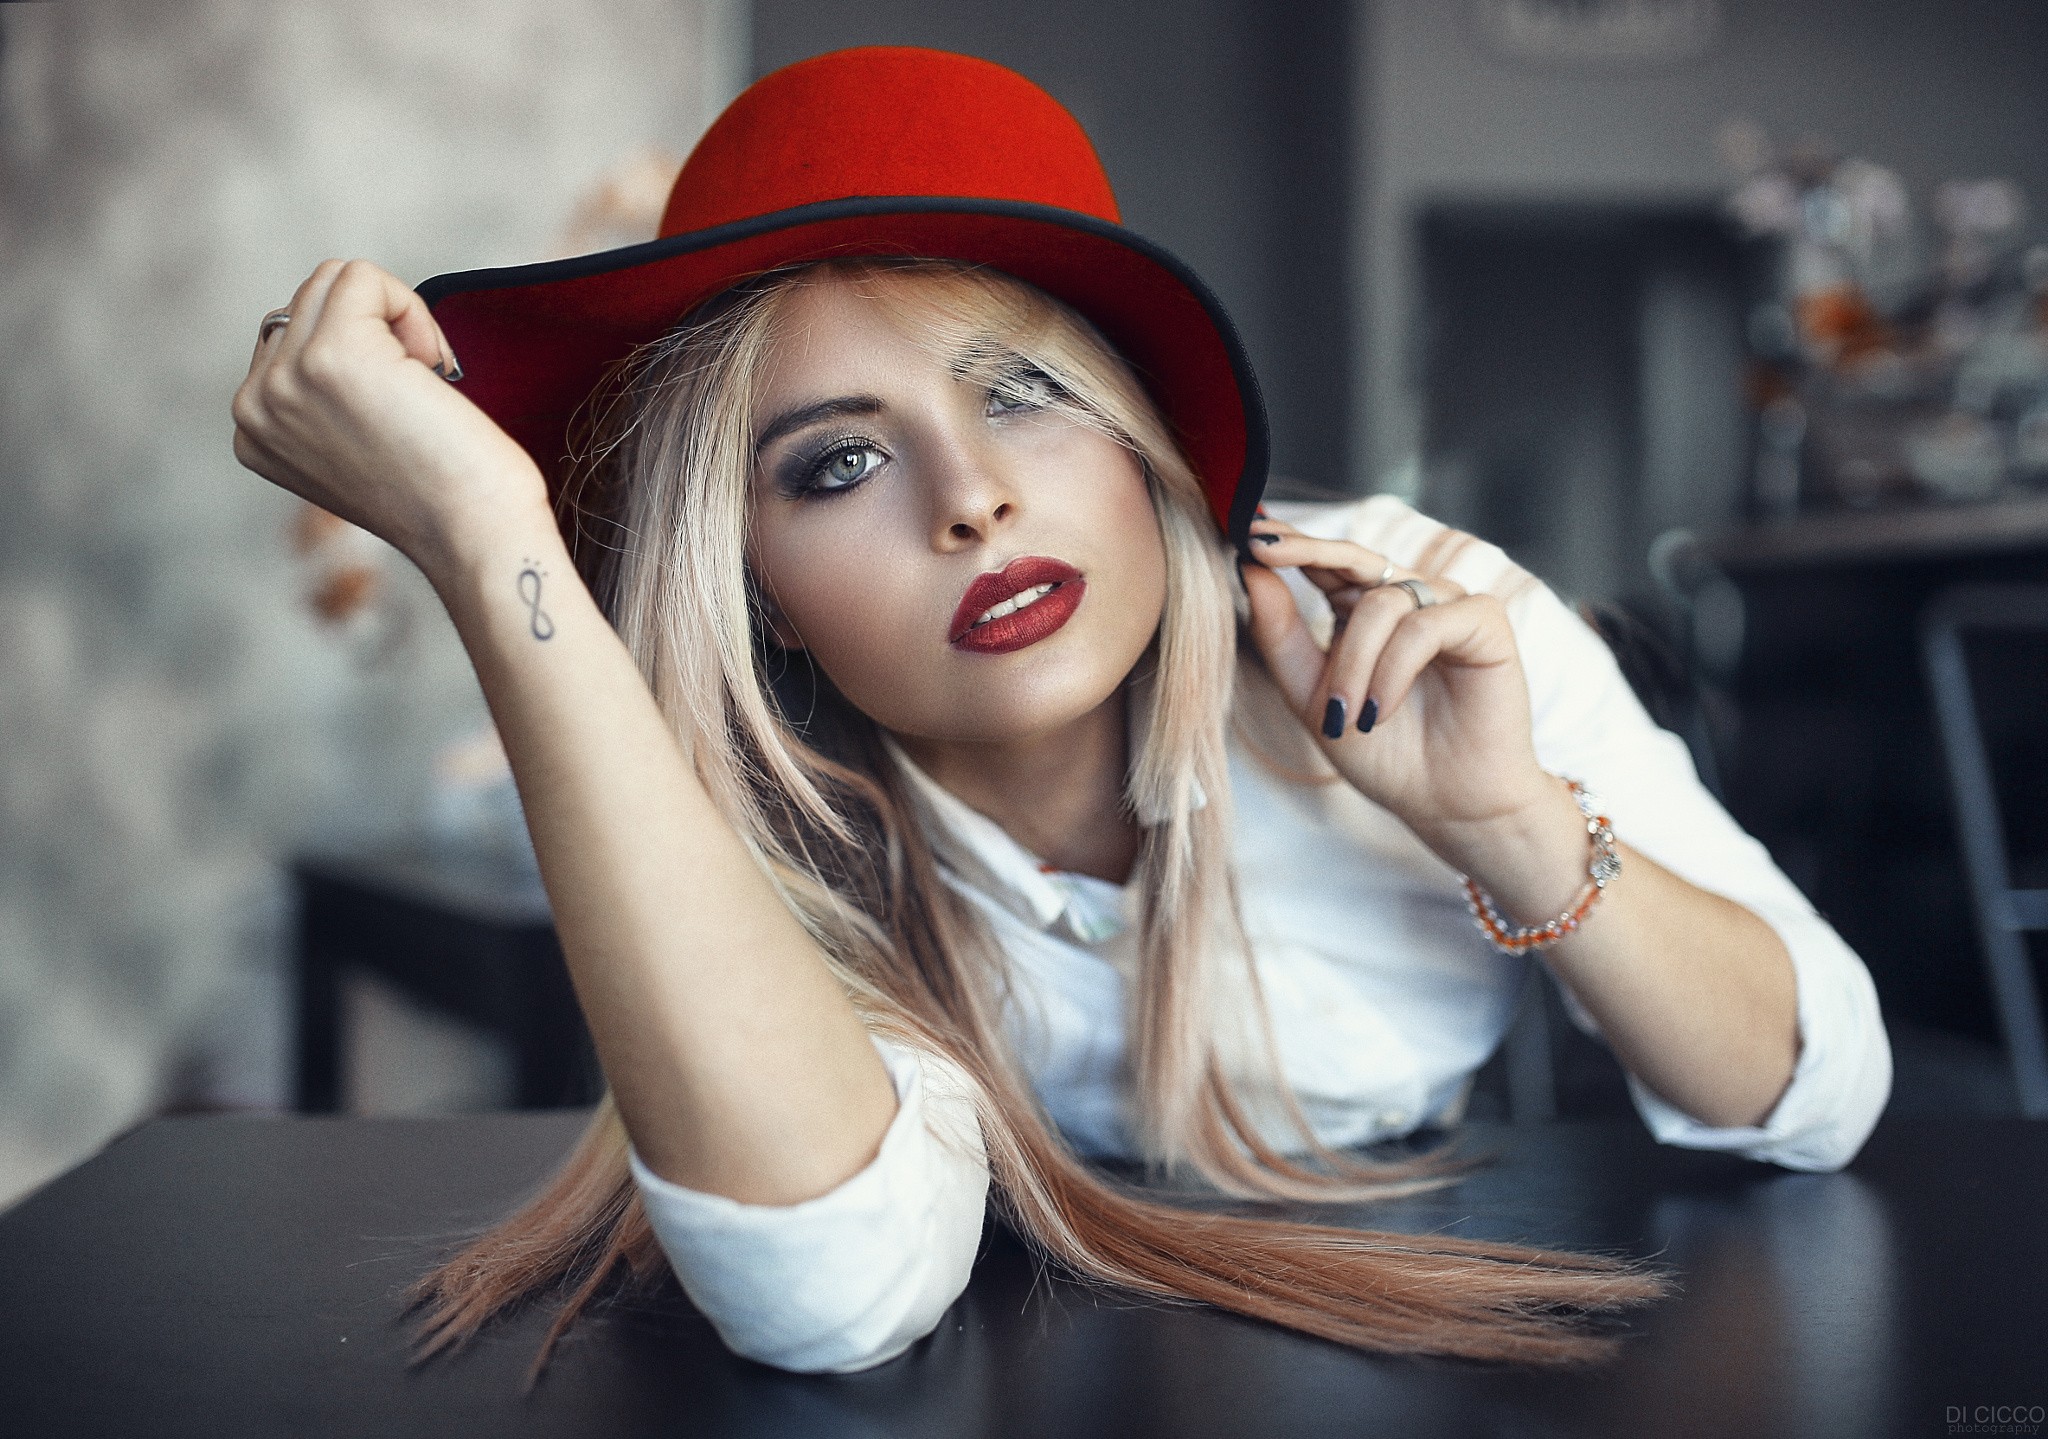 People 2048x1439 women blonde tattoo hat red lipstick portrait Alessandro Di Cicco model face blue eyes smoky eyes white shirt women with hats watermarked women indoors indoors black nails painted nails inked girls long hair closeup eyeliner lipstick April Slough